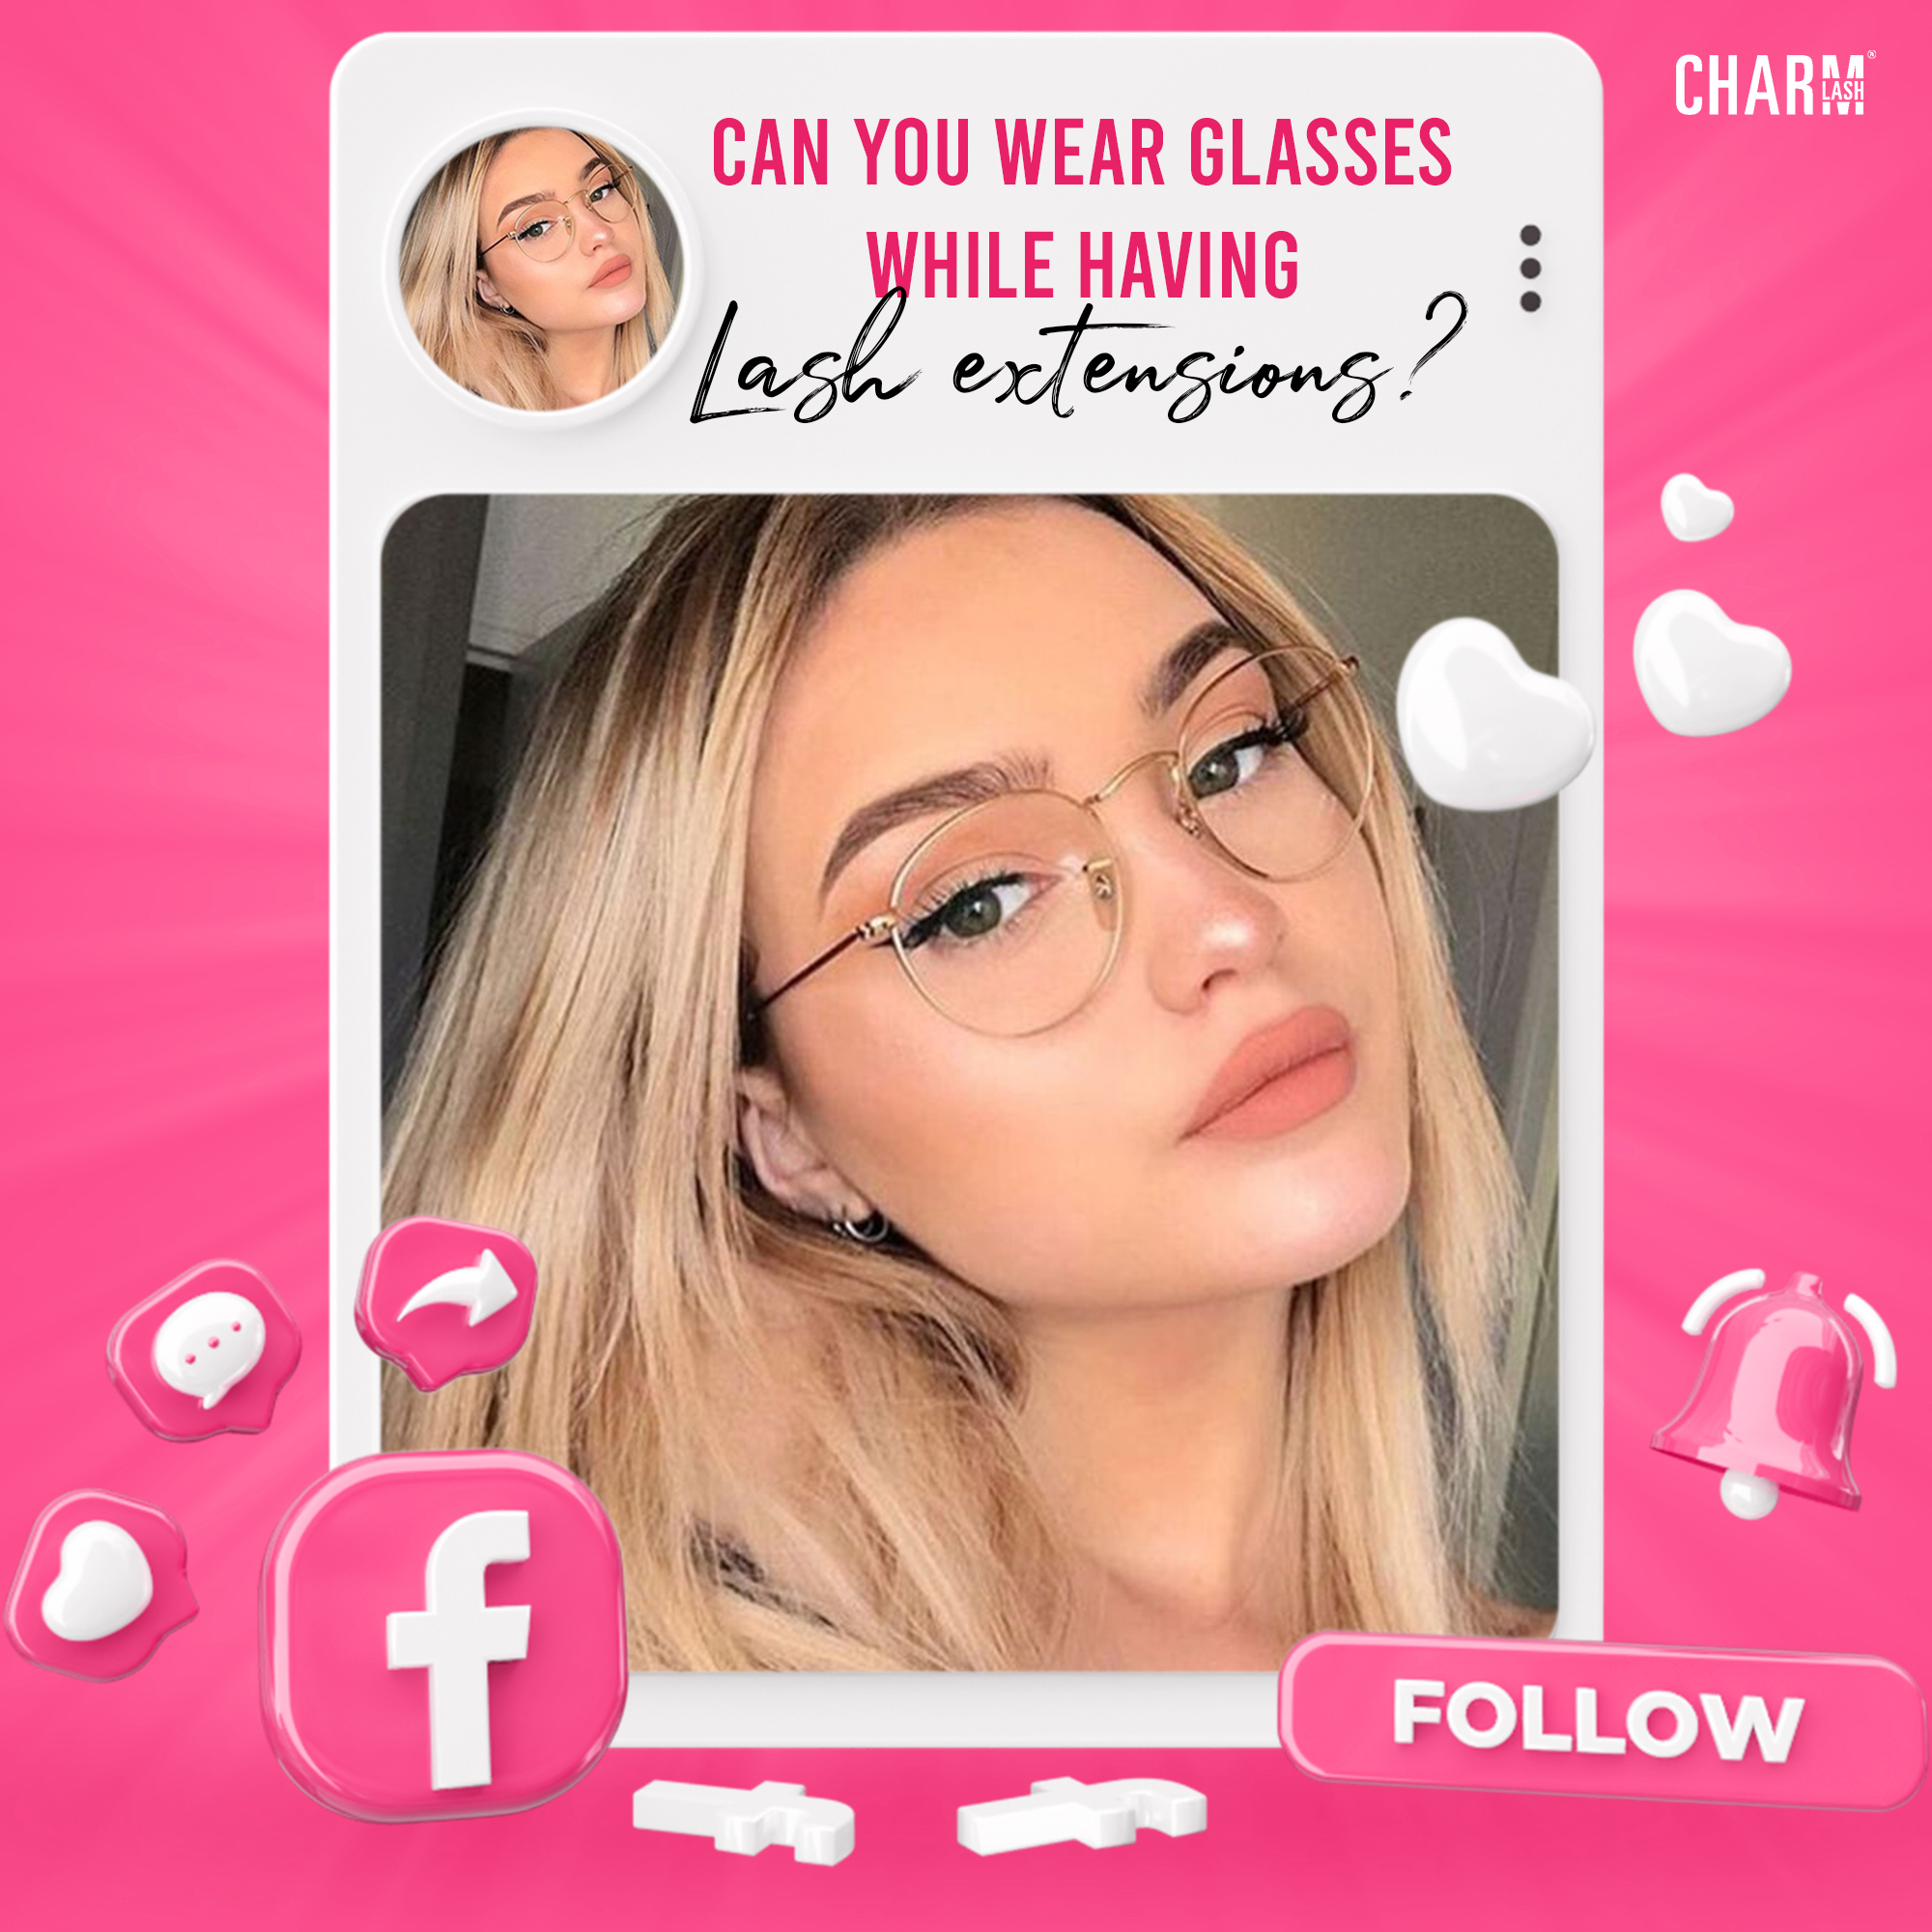 lash extensions with glasses, can you do that?